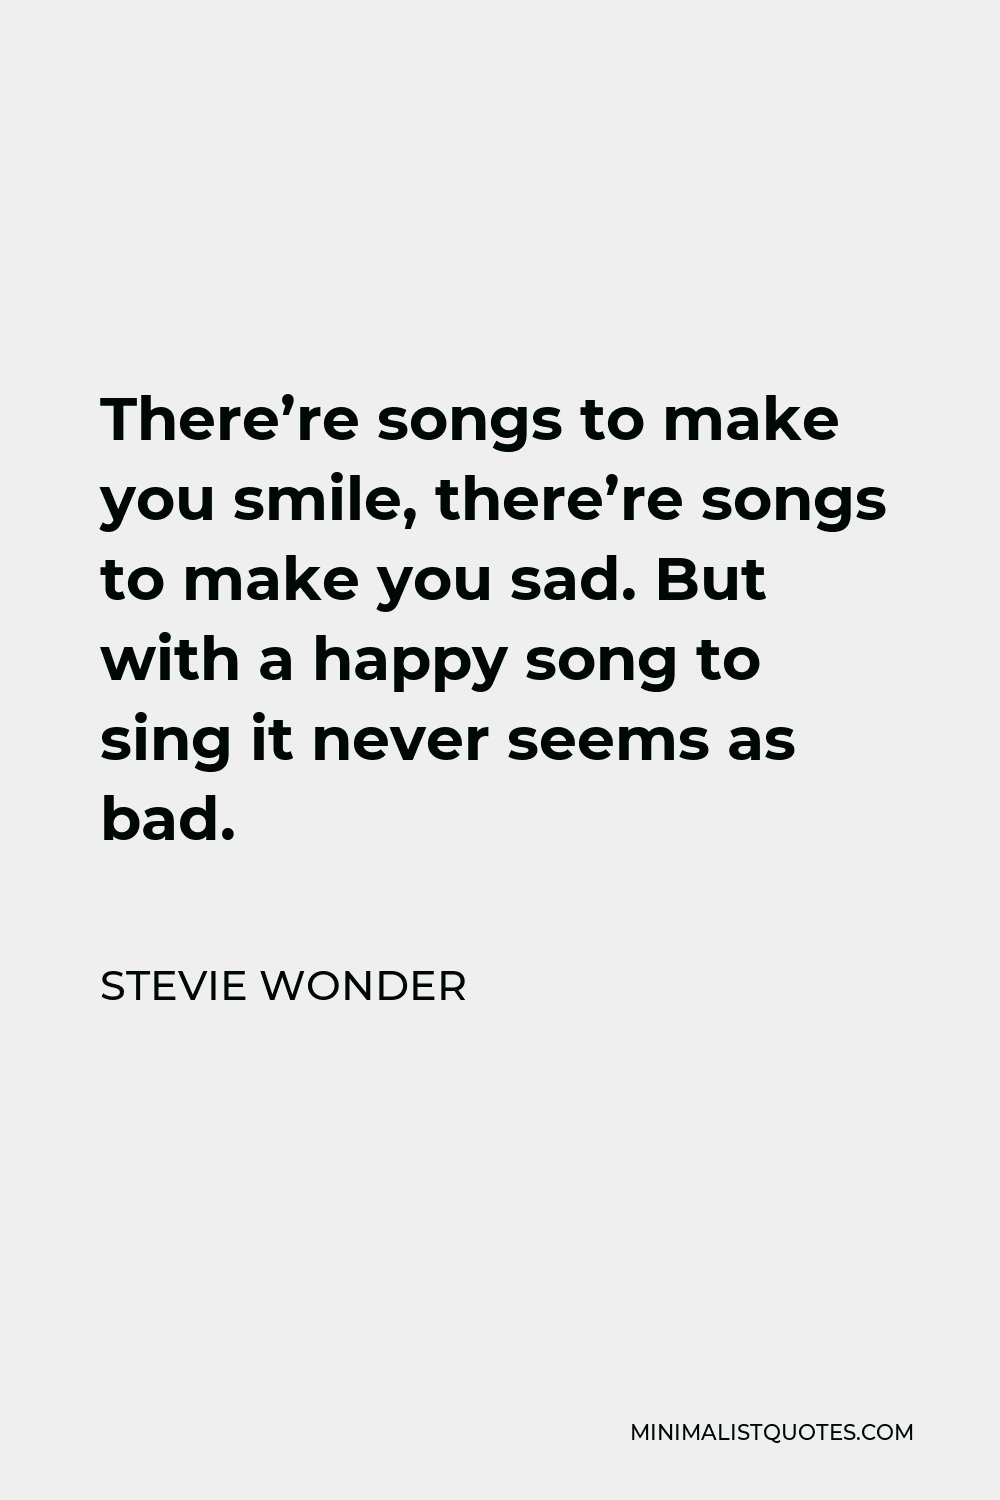 Stevie Wonder Quote - There’re songs to make you smile, there’re songs to make you sad. But with a happy song to sing it never seems as bad.